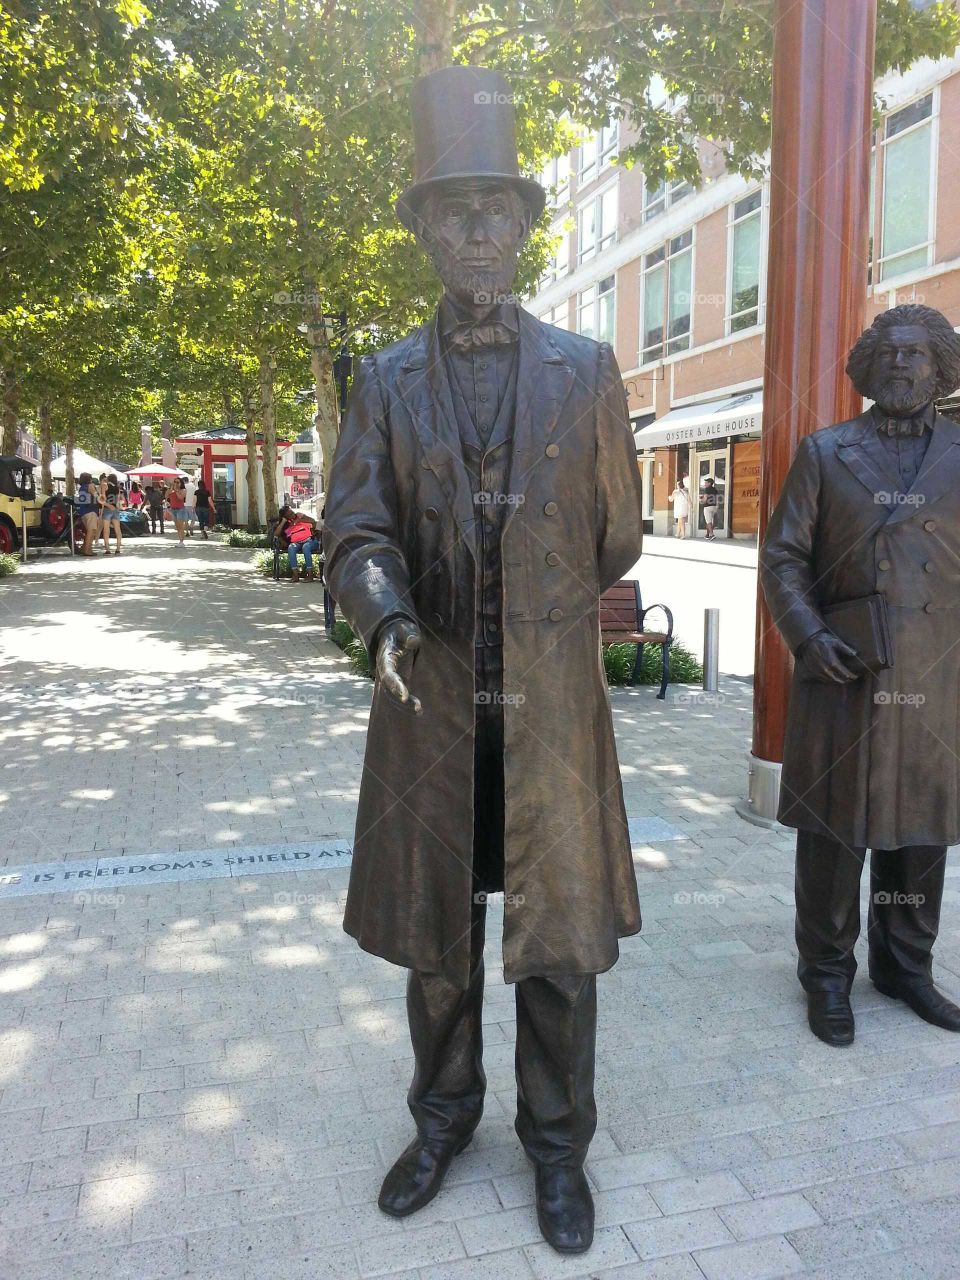 Statue of Abraham Lincoln, city